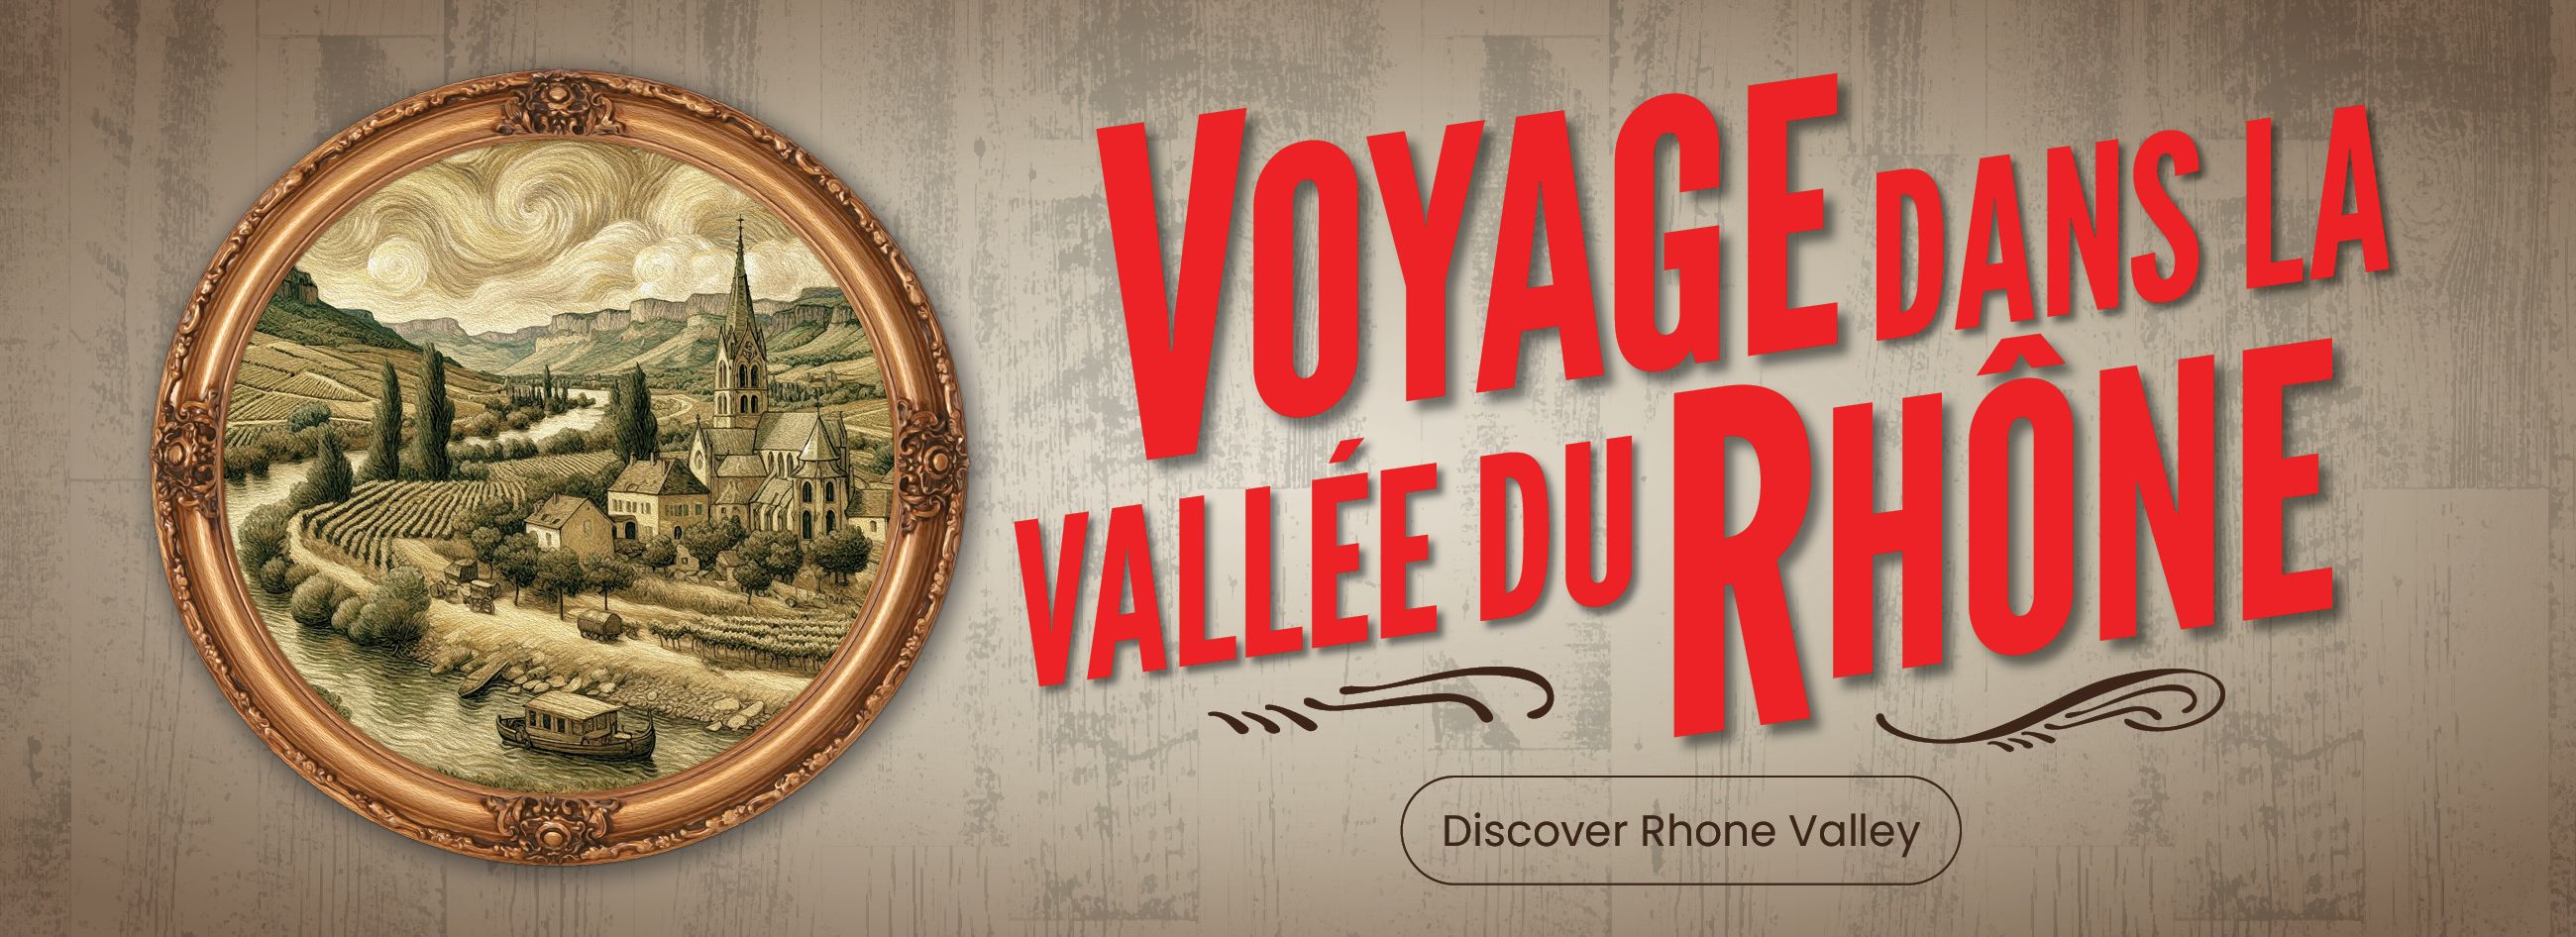 Discover Rhone Valley